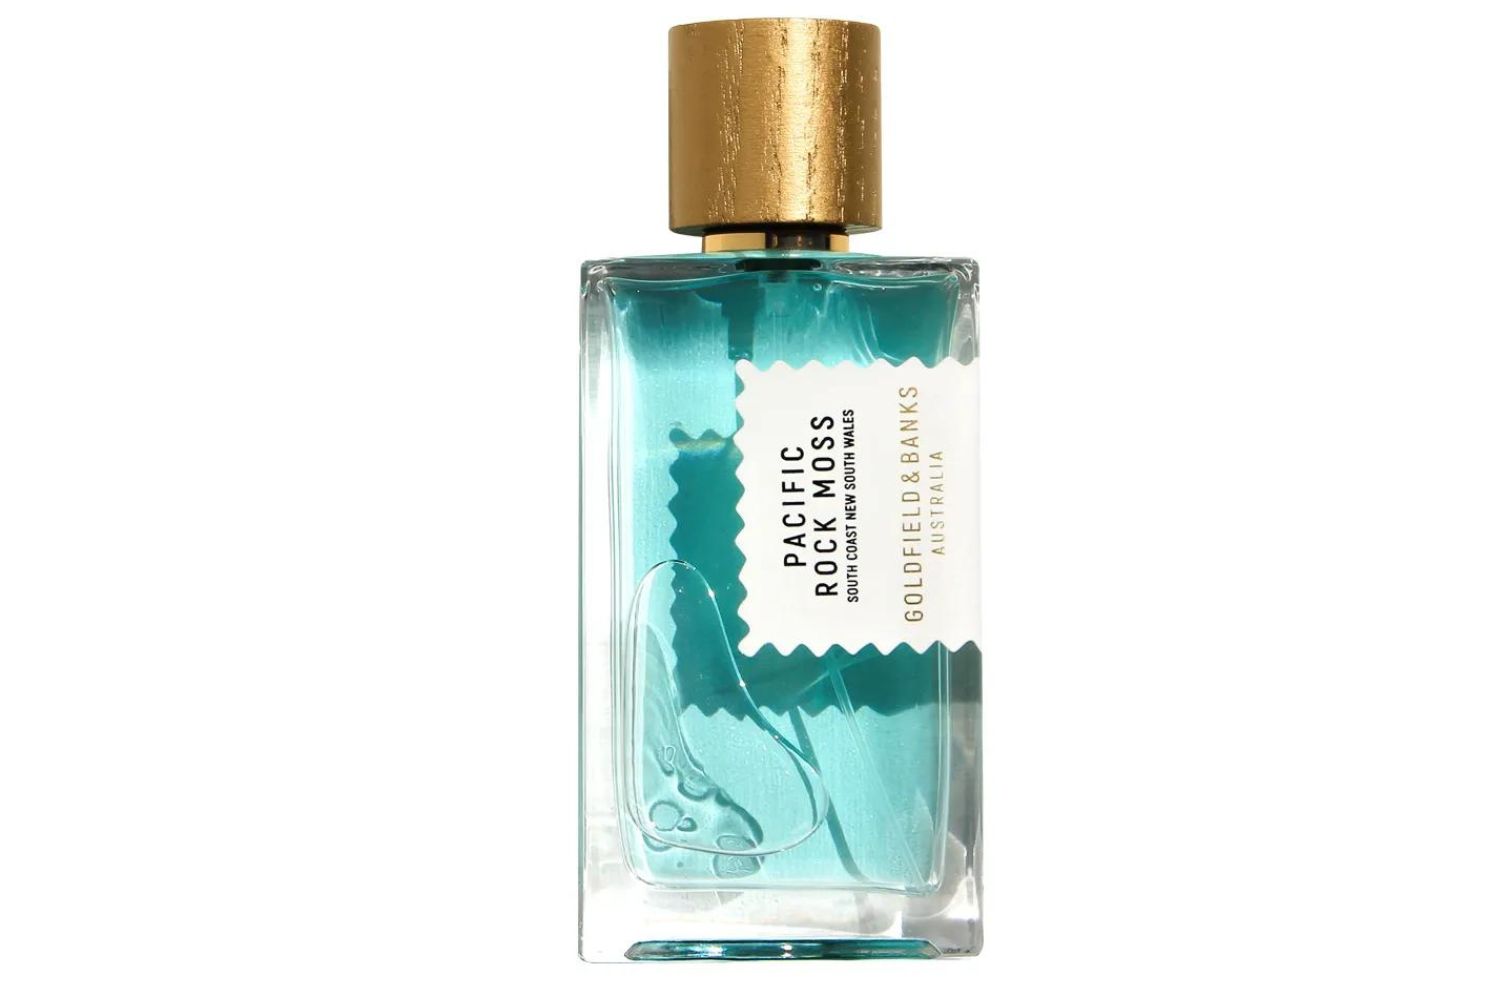 GOLDFIELD & BANKS Pacific Rock Moss perfume extract, 100ml, $235 at Sephora